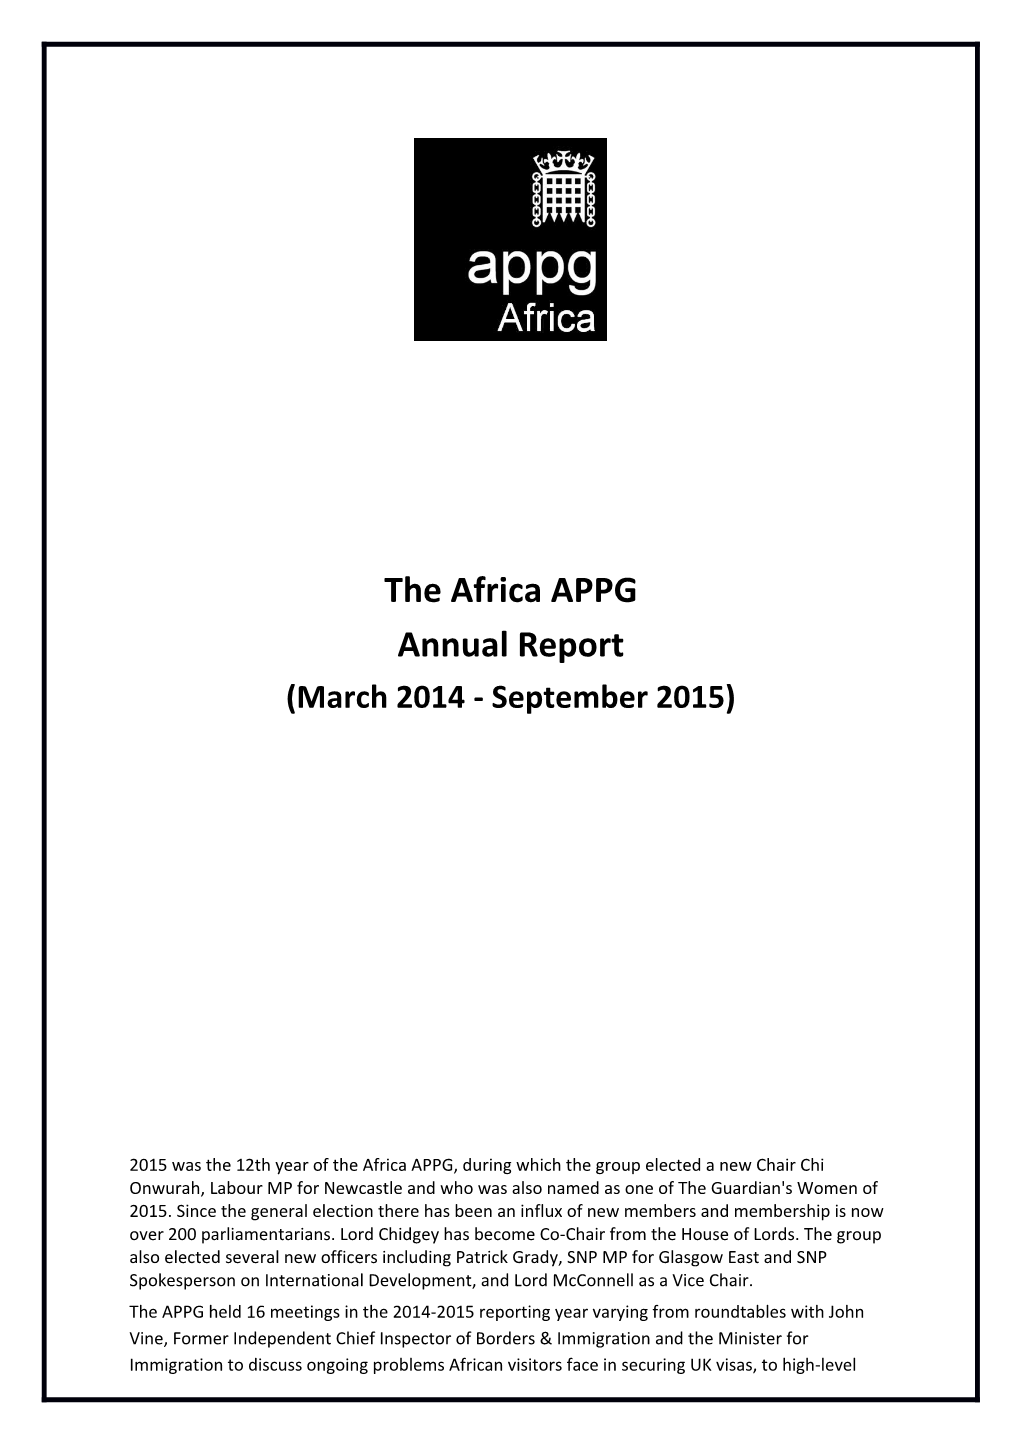 The Africa APPG